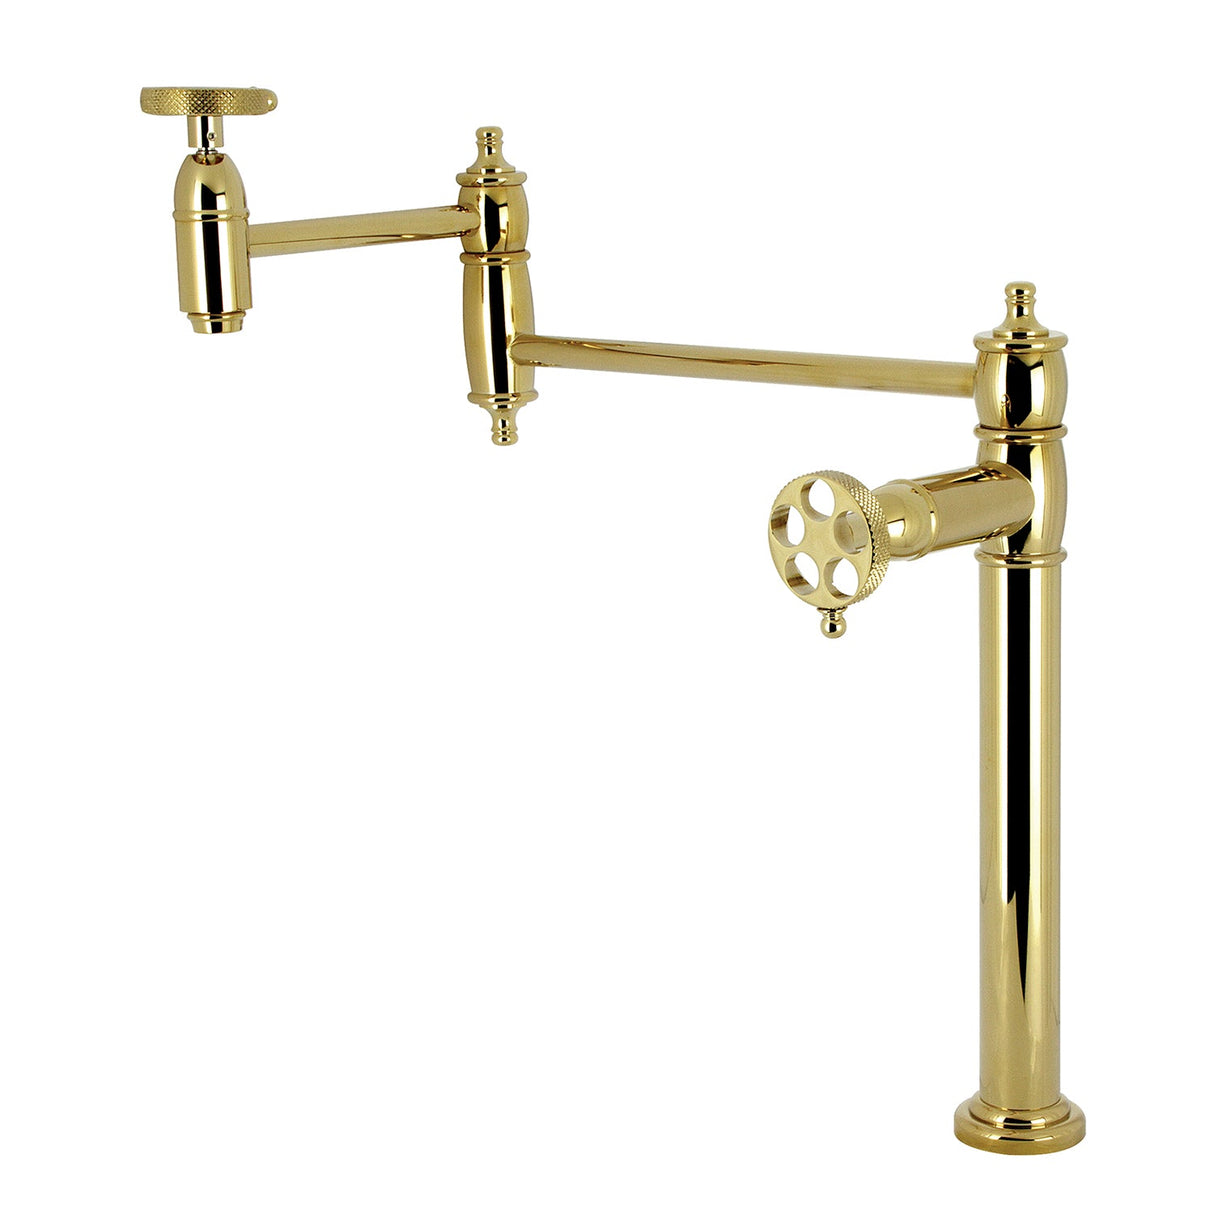 Webb KS3702RKX Two-Handle 1-Hole Deck Mount Pot Filler Faucet with Knurled Handle, Polished Brass